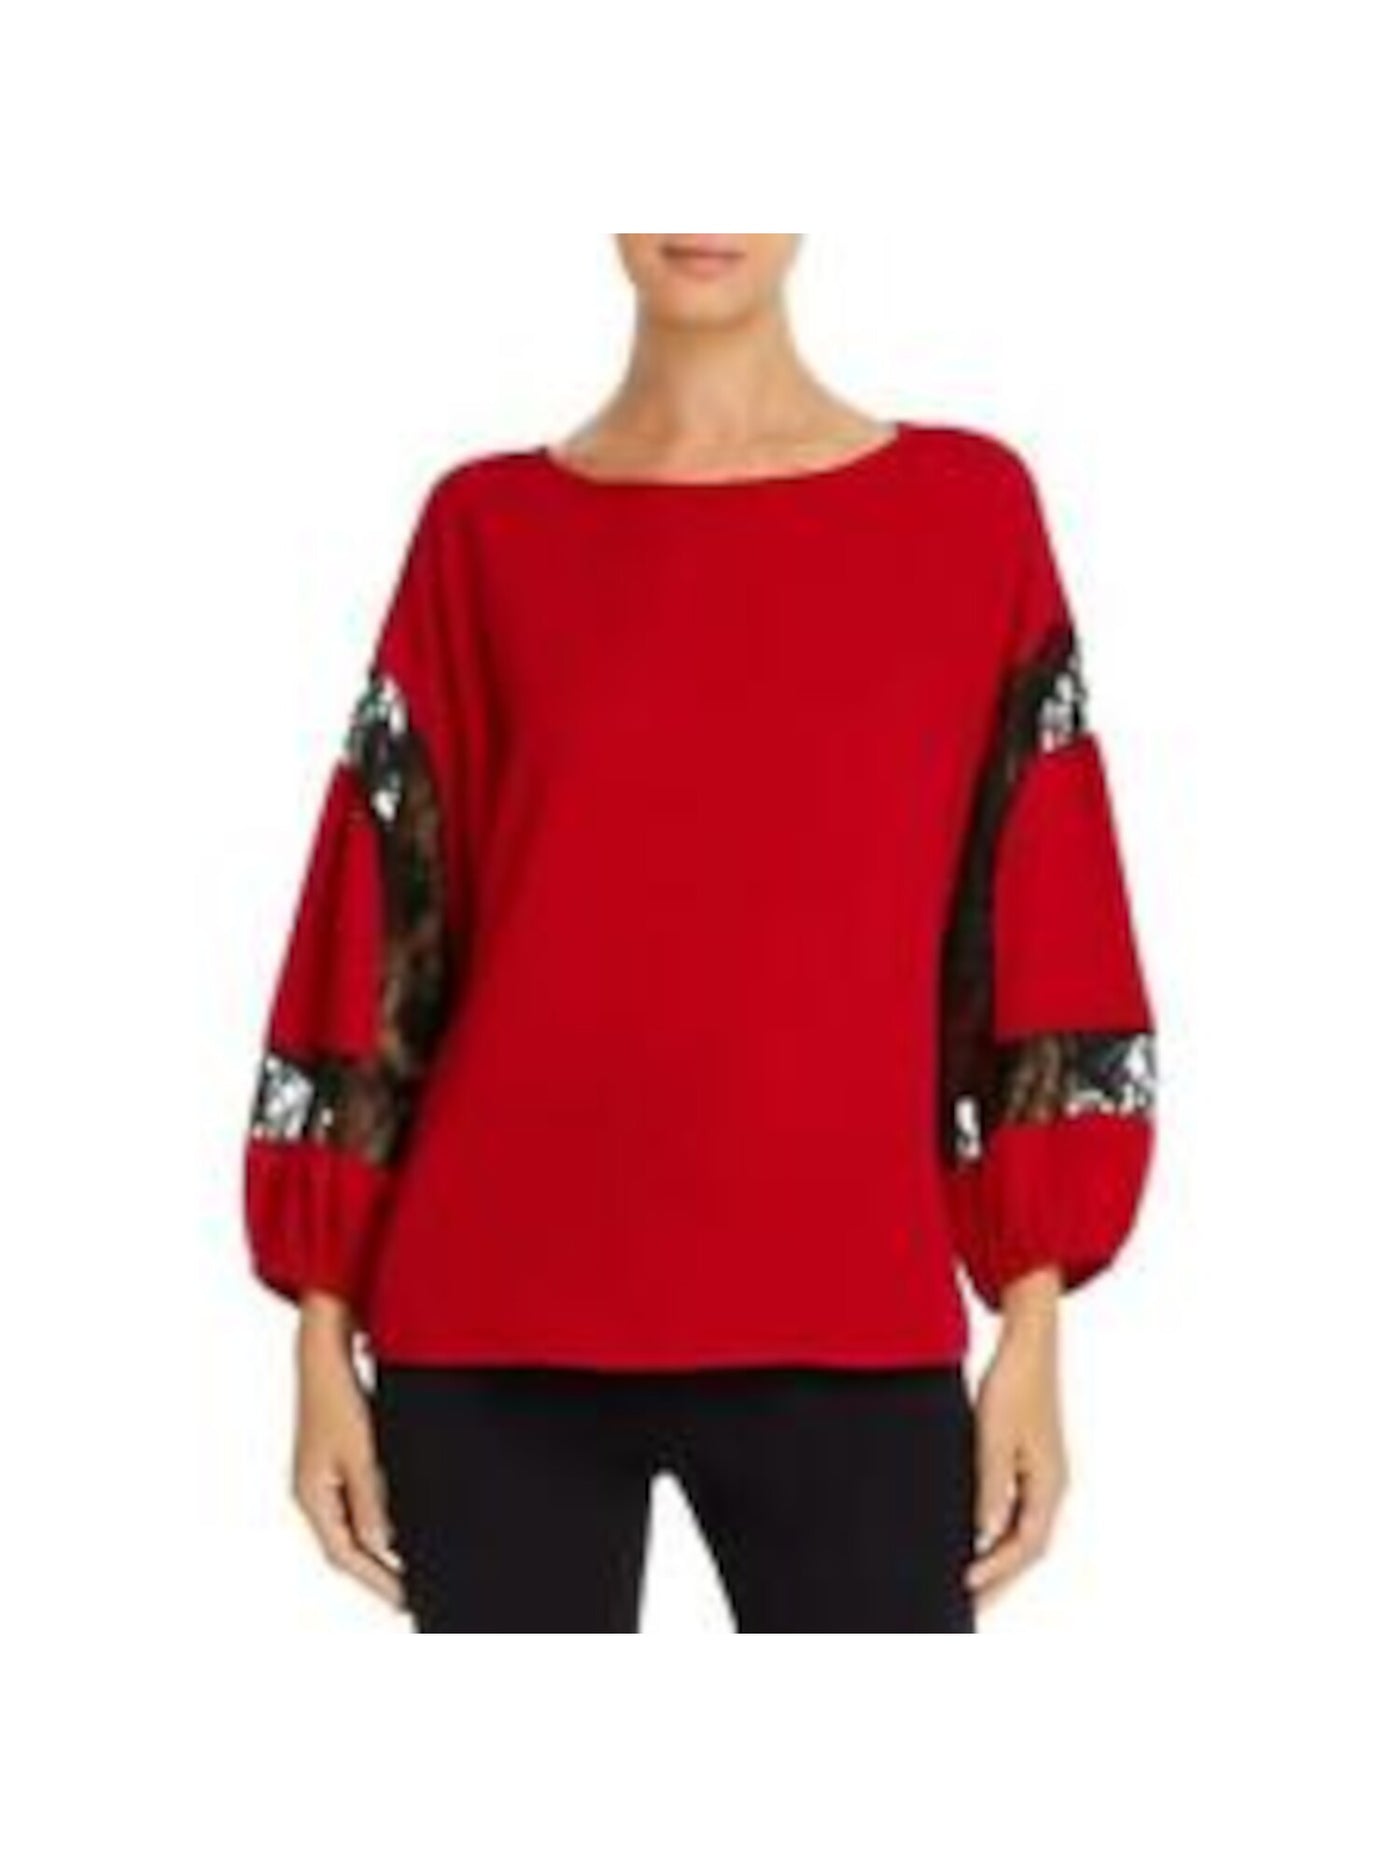 SINGLE THREAD Womens Red Long Sleeve Boat Neck Wear To Work Top S